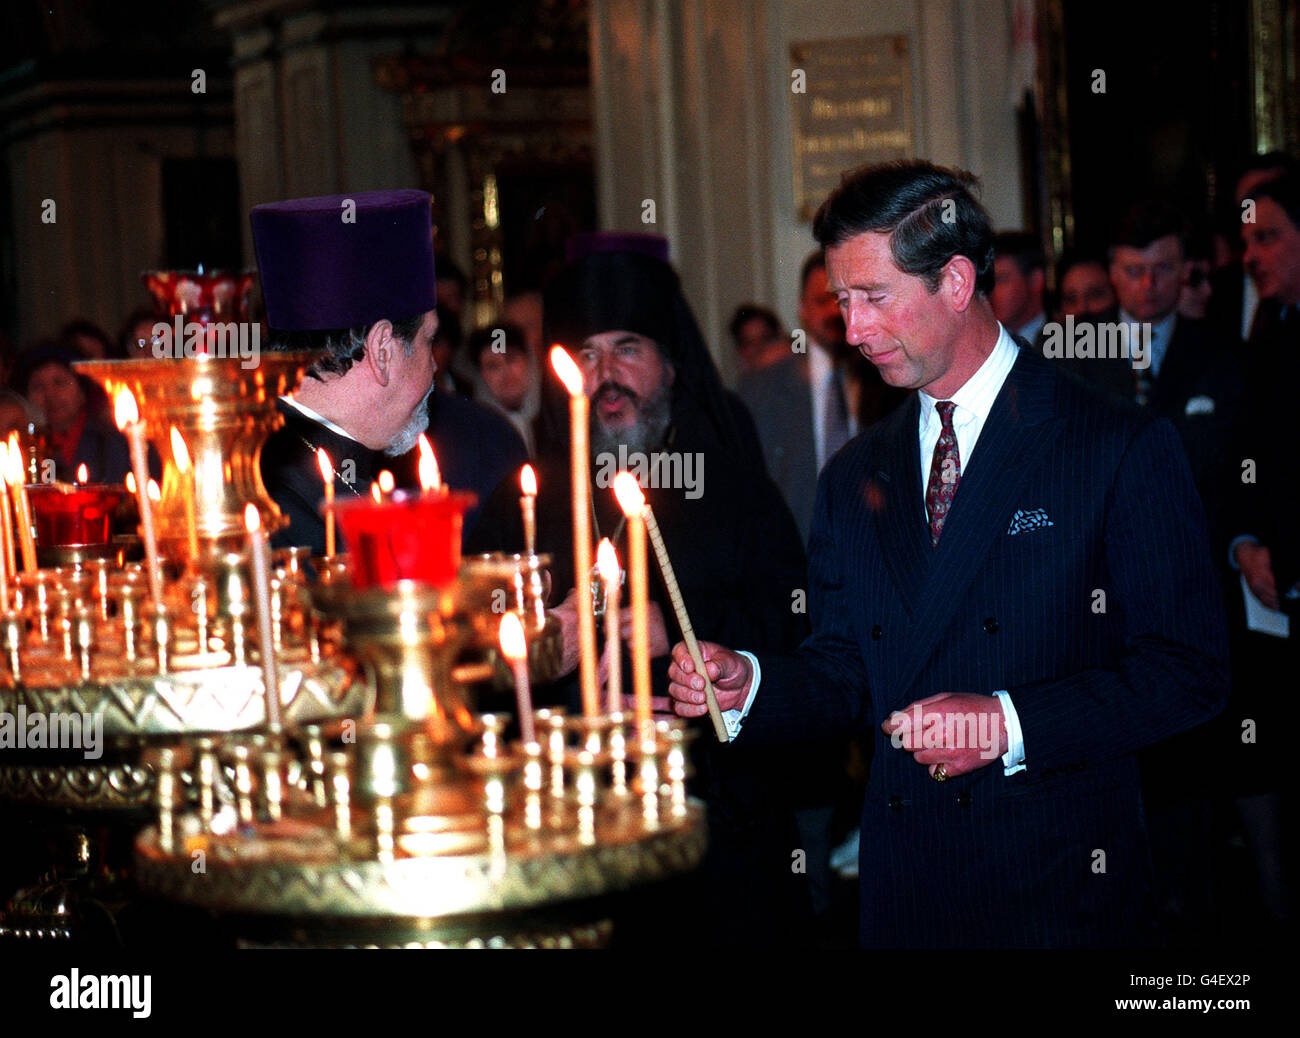 PA NEWS 17/5/94 THE PRINCE OF WALES LIGHTS A CANDLE IN FRONT OF THE HOLIEST ICON DURING A VISIT TO THE RUSSIAN ORTHODOX CATHEDRAL OF ST. NICHOLAS IN ST. PETERSBURG. Stock Photo